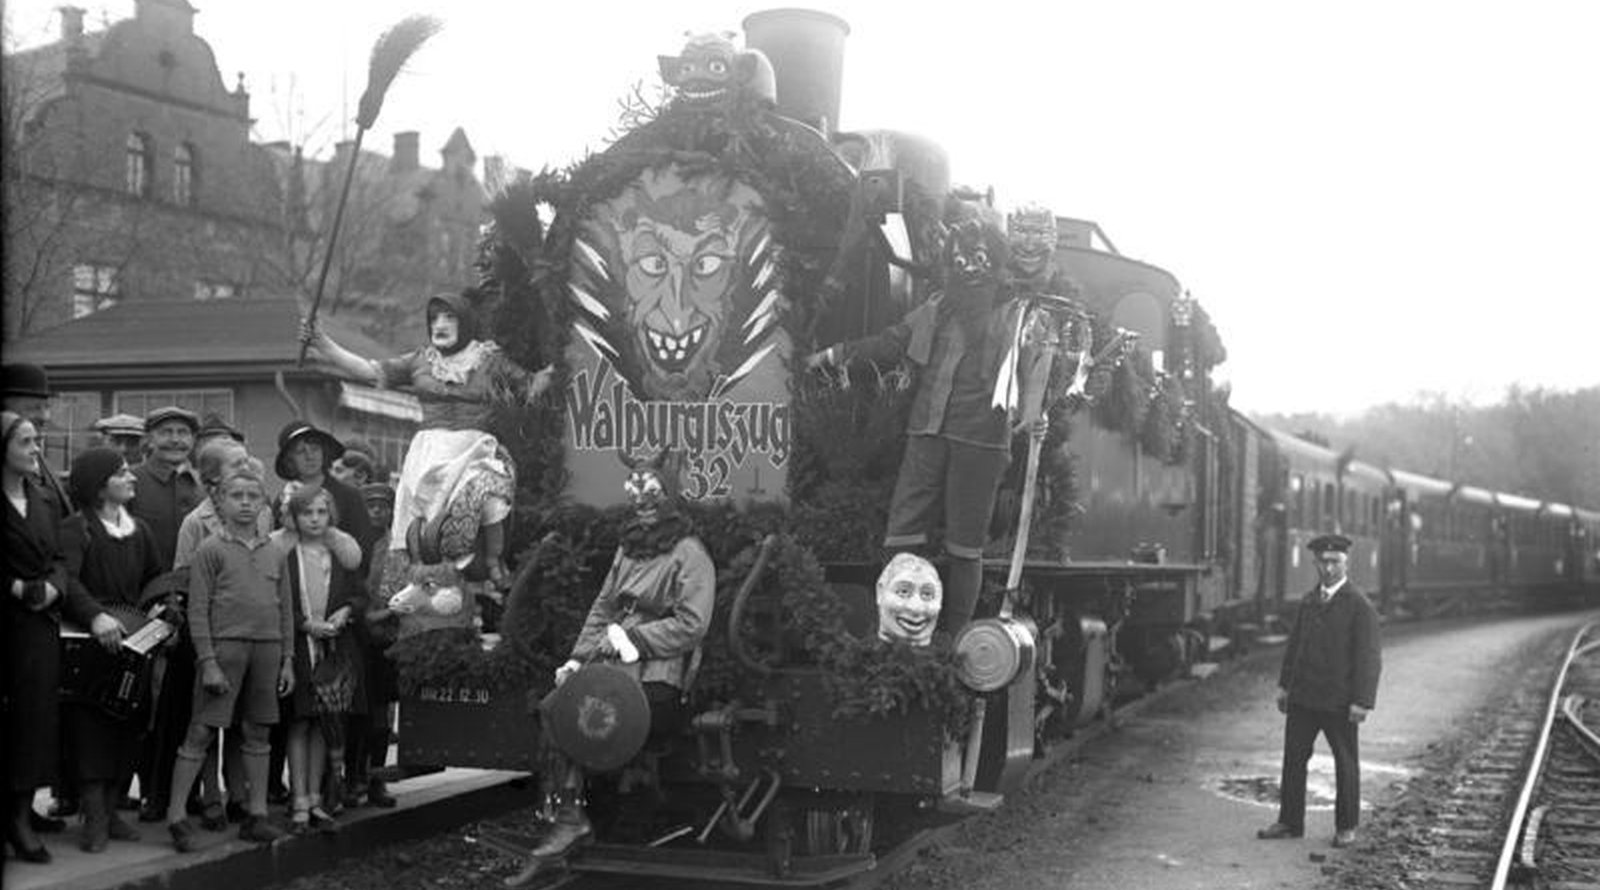 Decorated locomotive for Walpurgis Night 1932 on the way to the Brocken